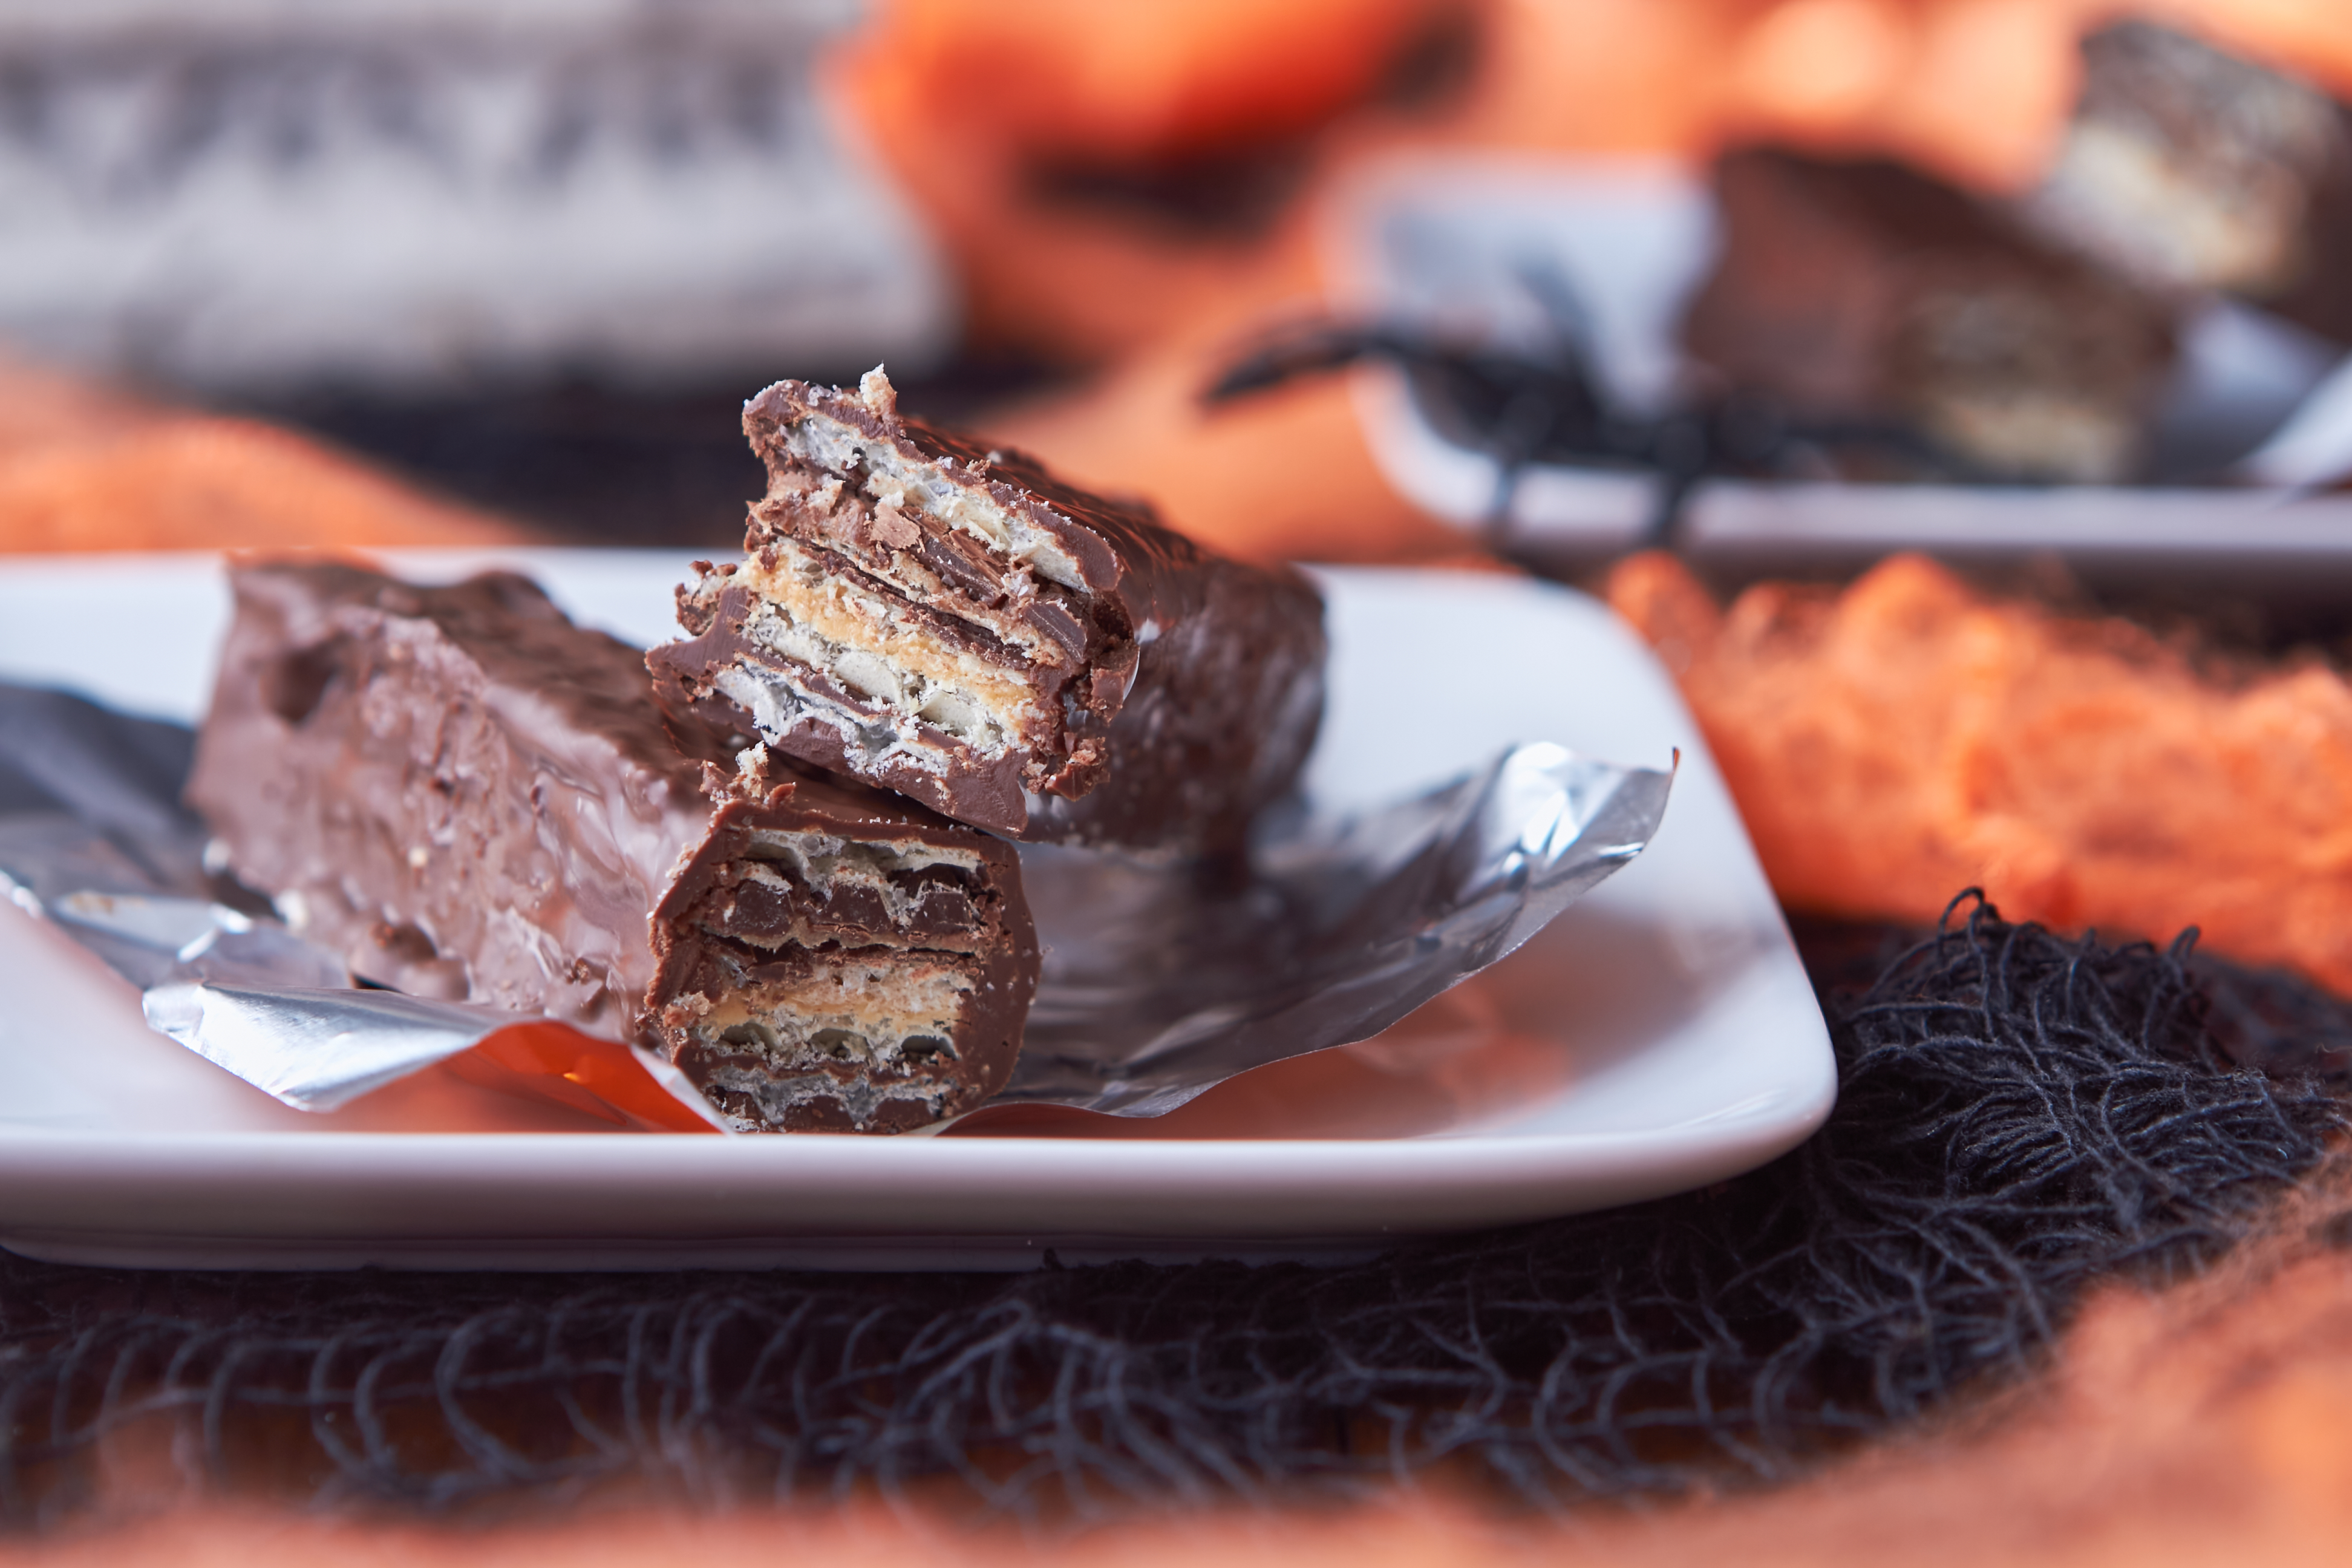 Homemade Gluten Free Kit Kats  Chocolate Covered Wafer Cookies